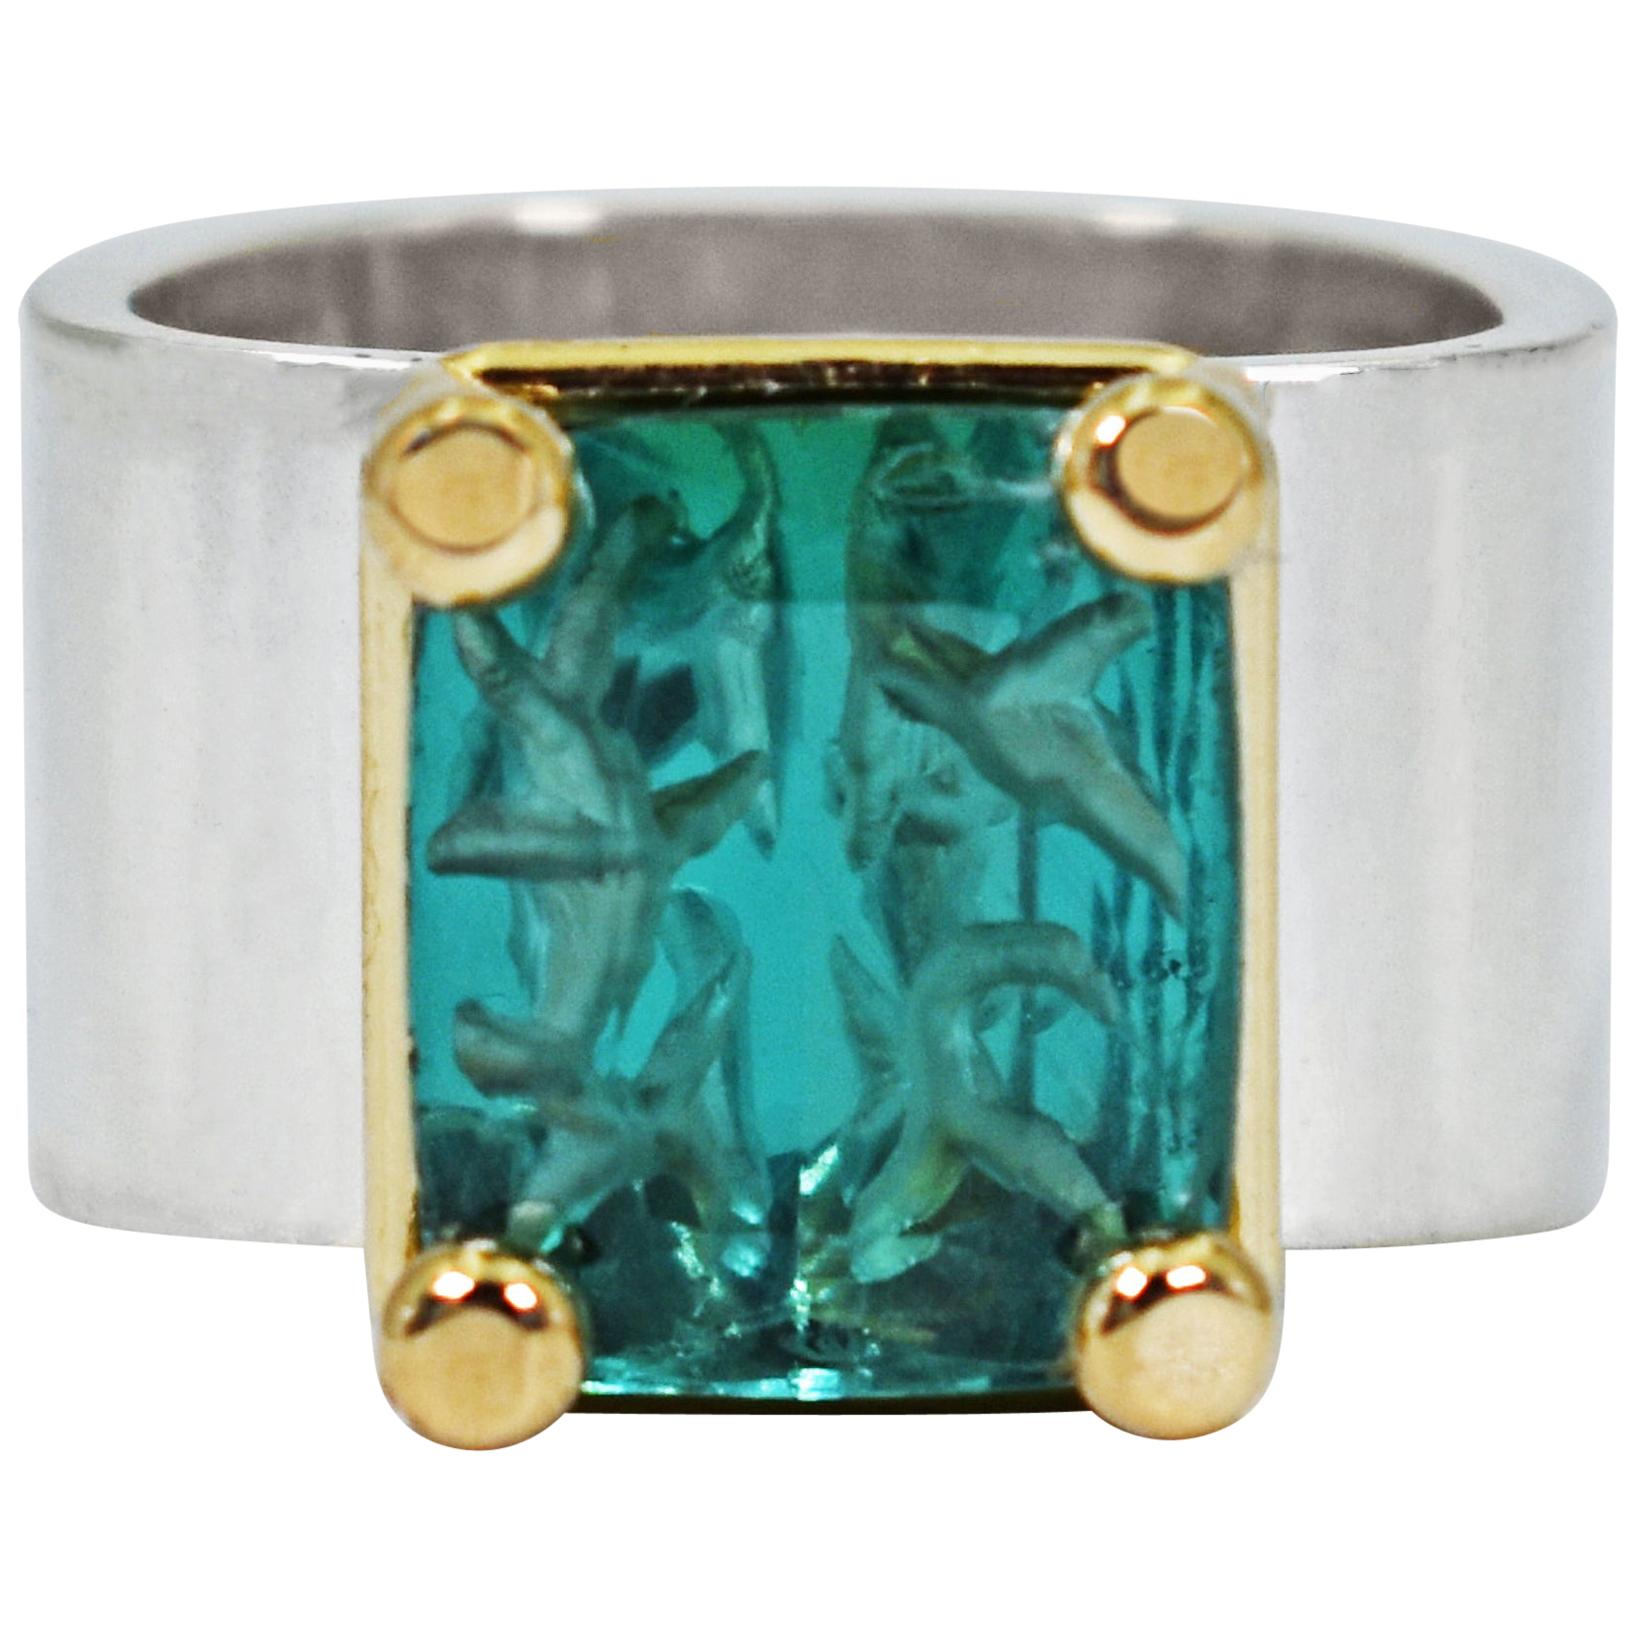 Carved 5.39 Carat Indicolite Tourmaline Two-Tone Cocktail Ring